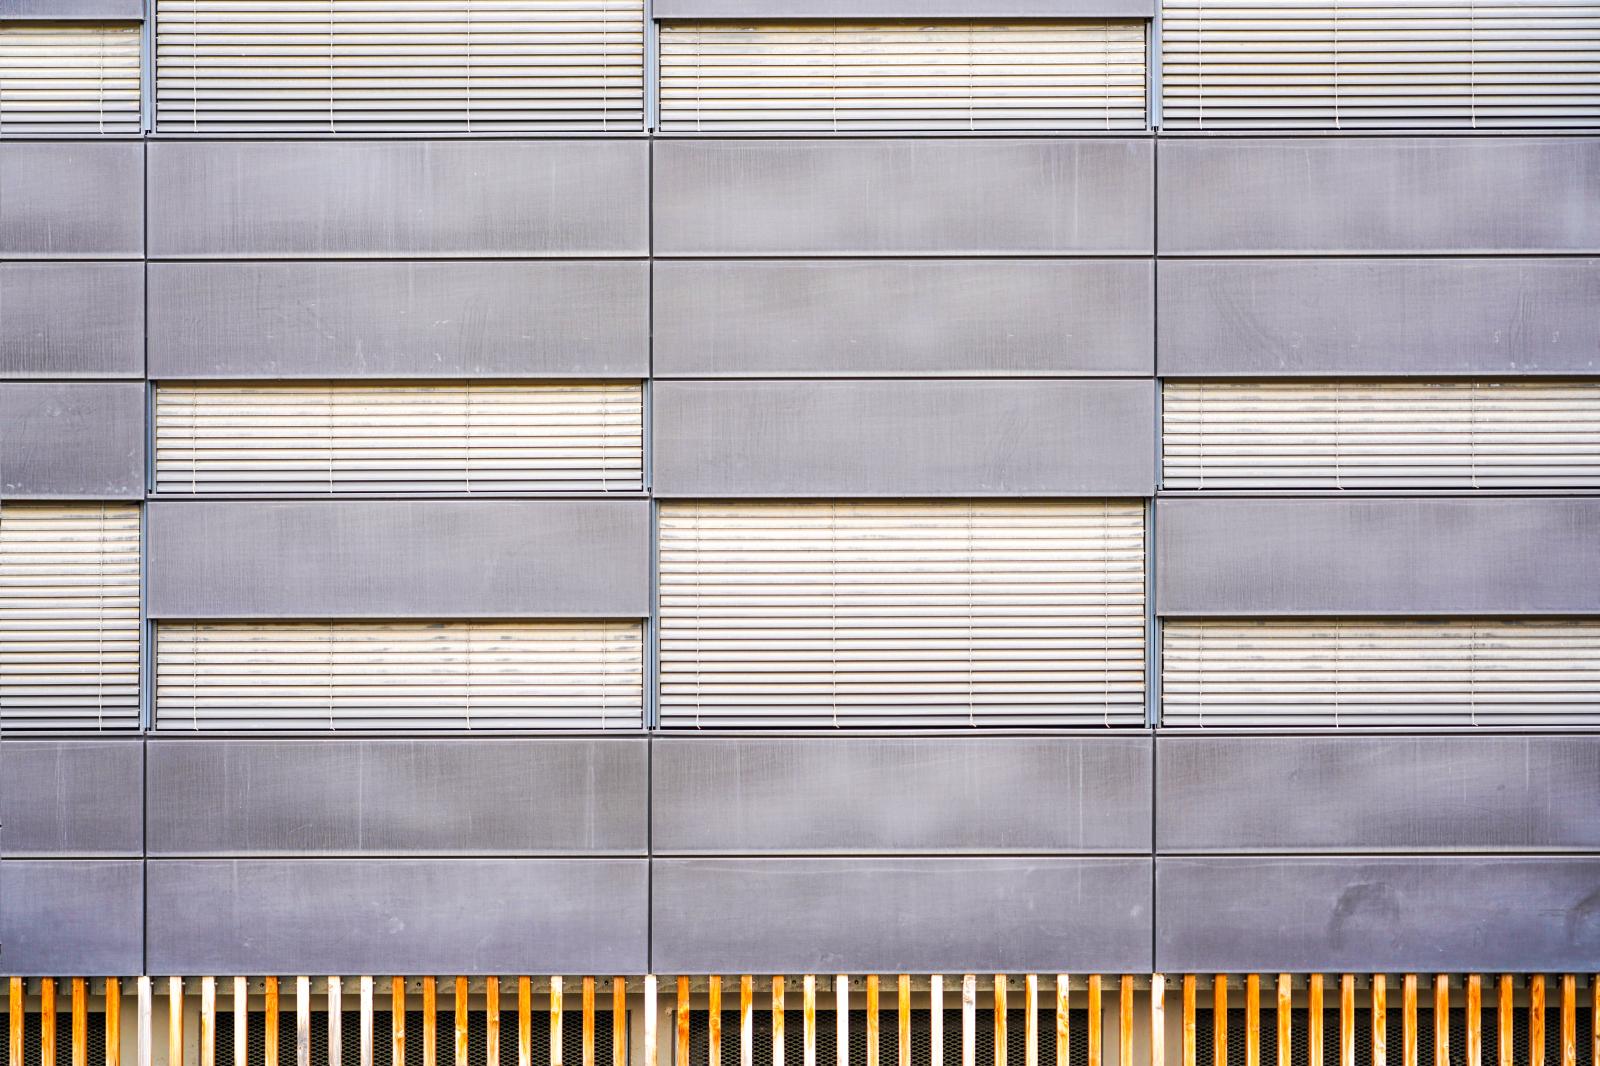 Image from New Photographs -  Grenoble, France  # 4298 4/2024 Rhythms in Gray: Pattern...